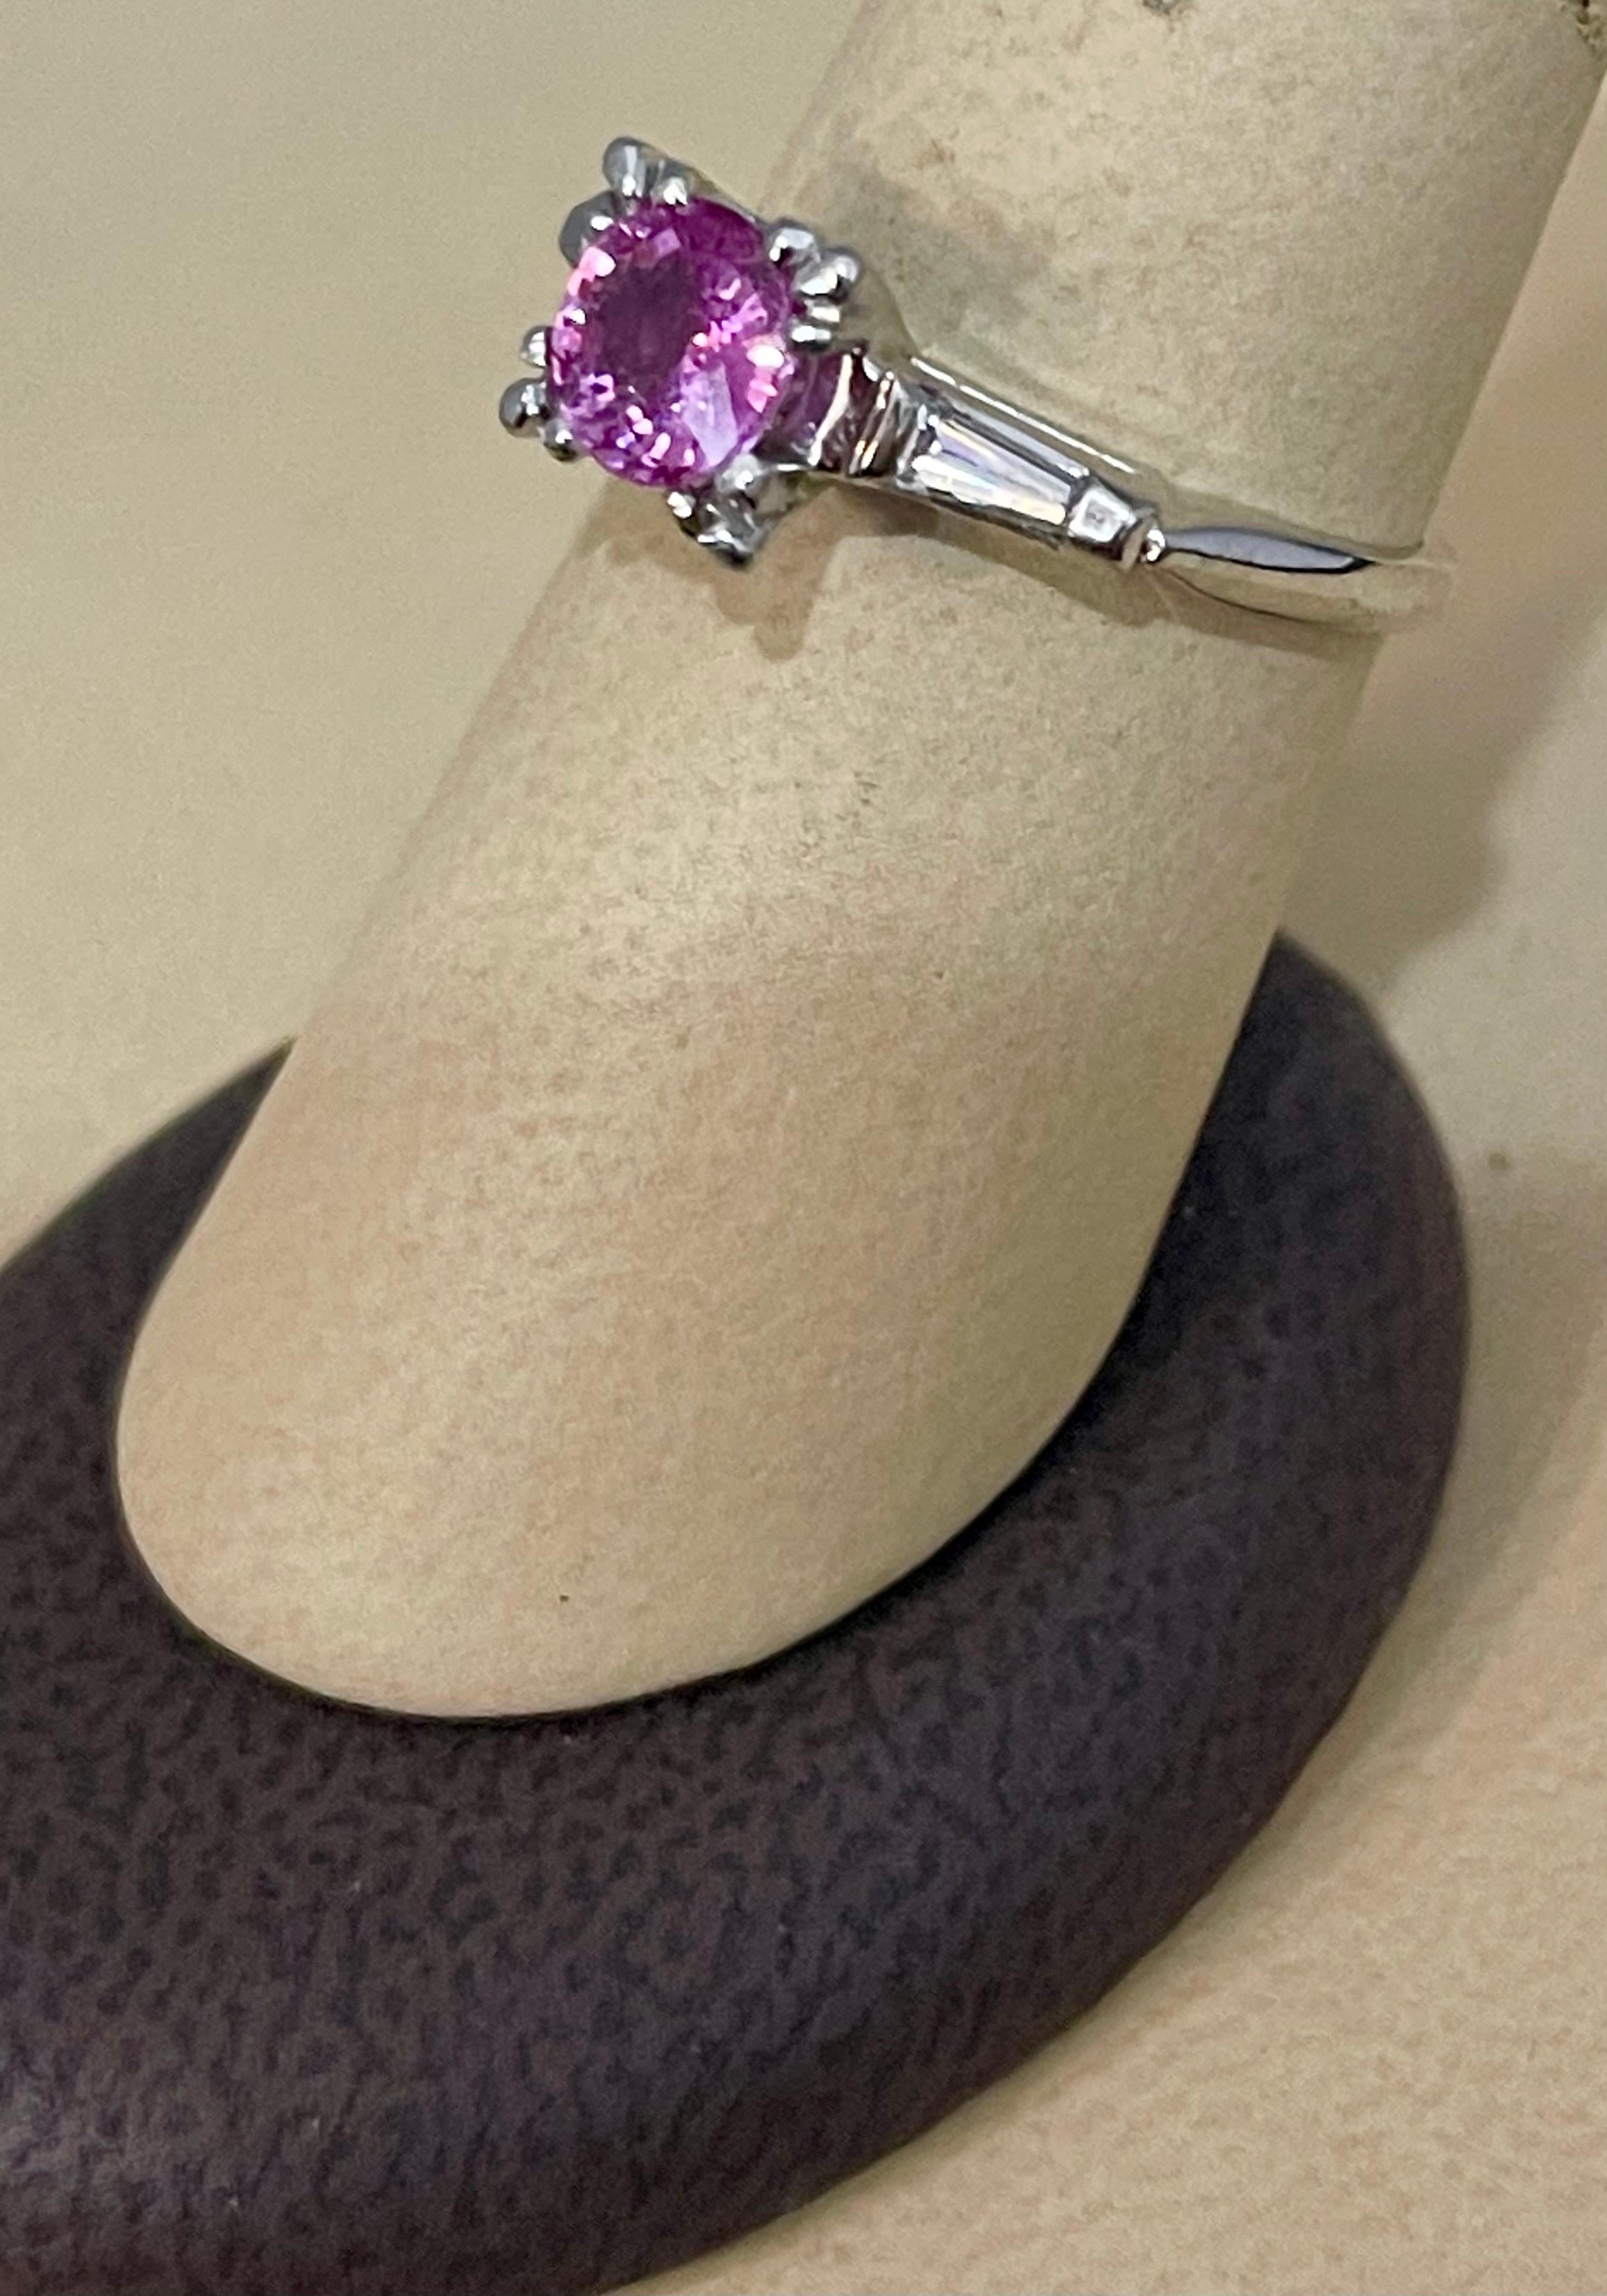 1 Ct Round Pink Sapphire 2 Baguettes Diamond in Platinum Ring, Estate For Sale 3